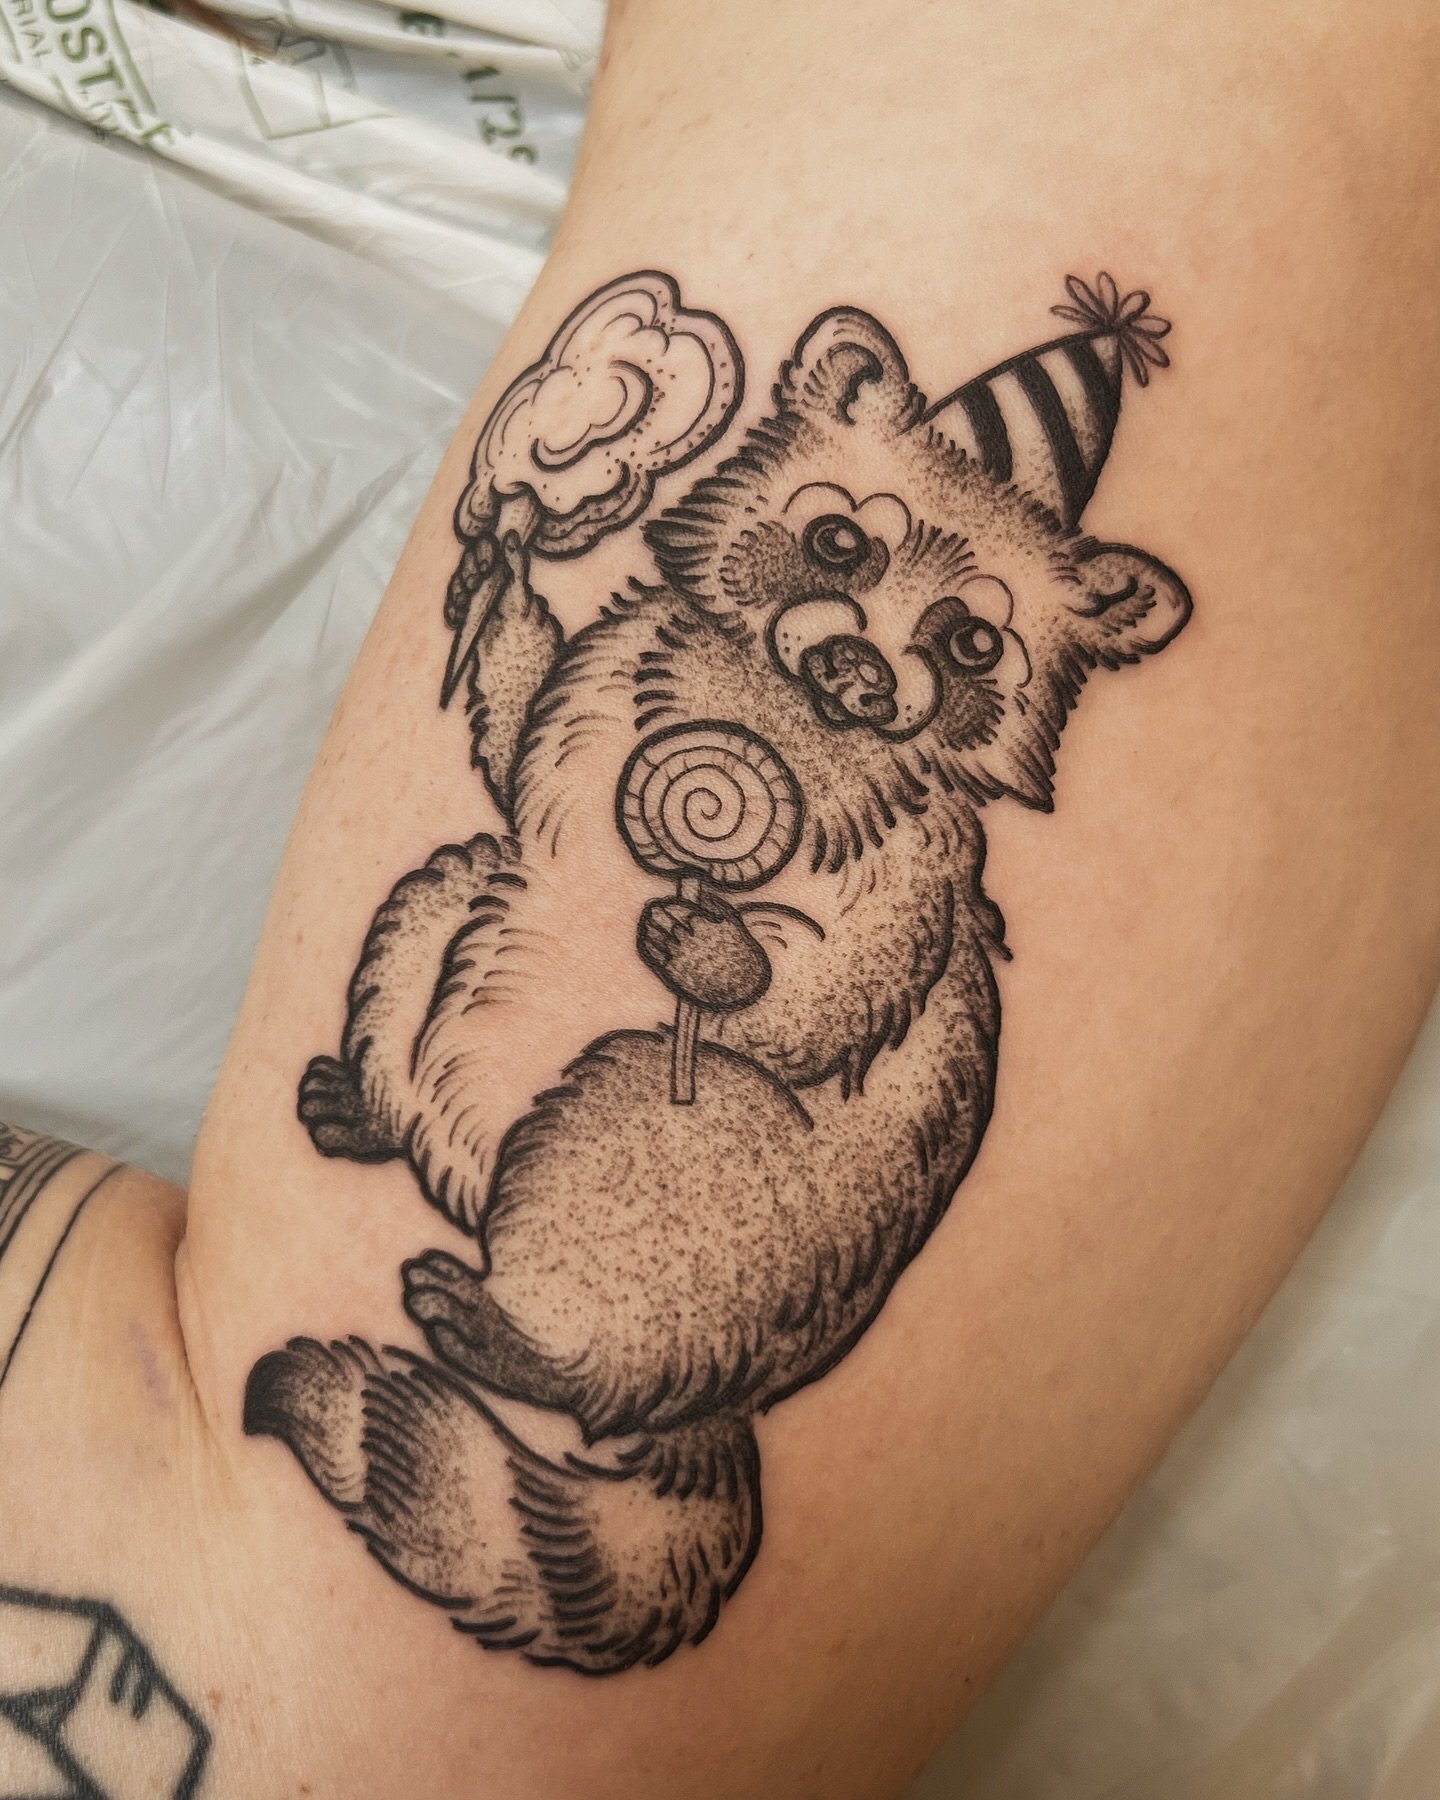 Yall remember the video of the raccoon who kept trying to wash his cotton candy and was so shocked when it disappeared? This is my version of redemption for him lol. Get your treats, little buddy! And thank you to Tori for getting this piece!
.
.
.
#